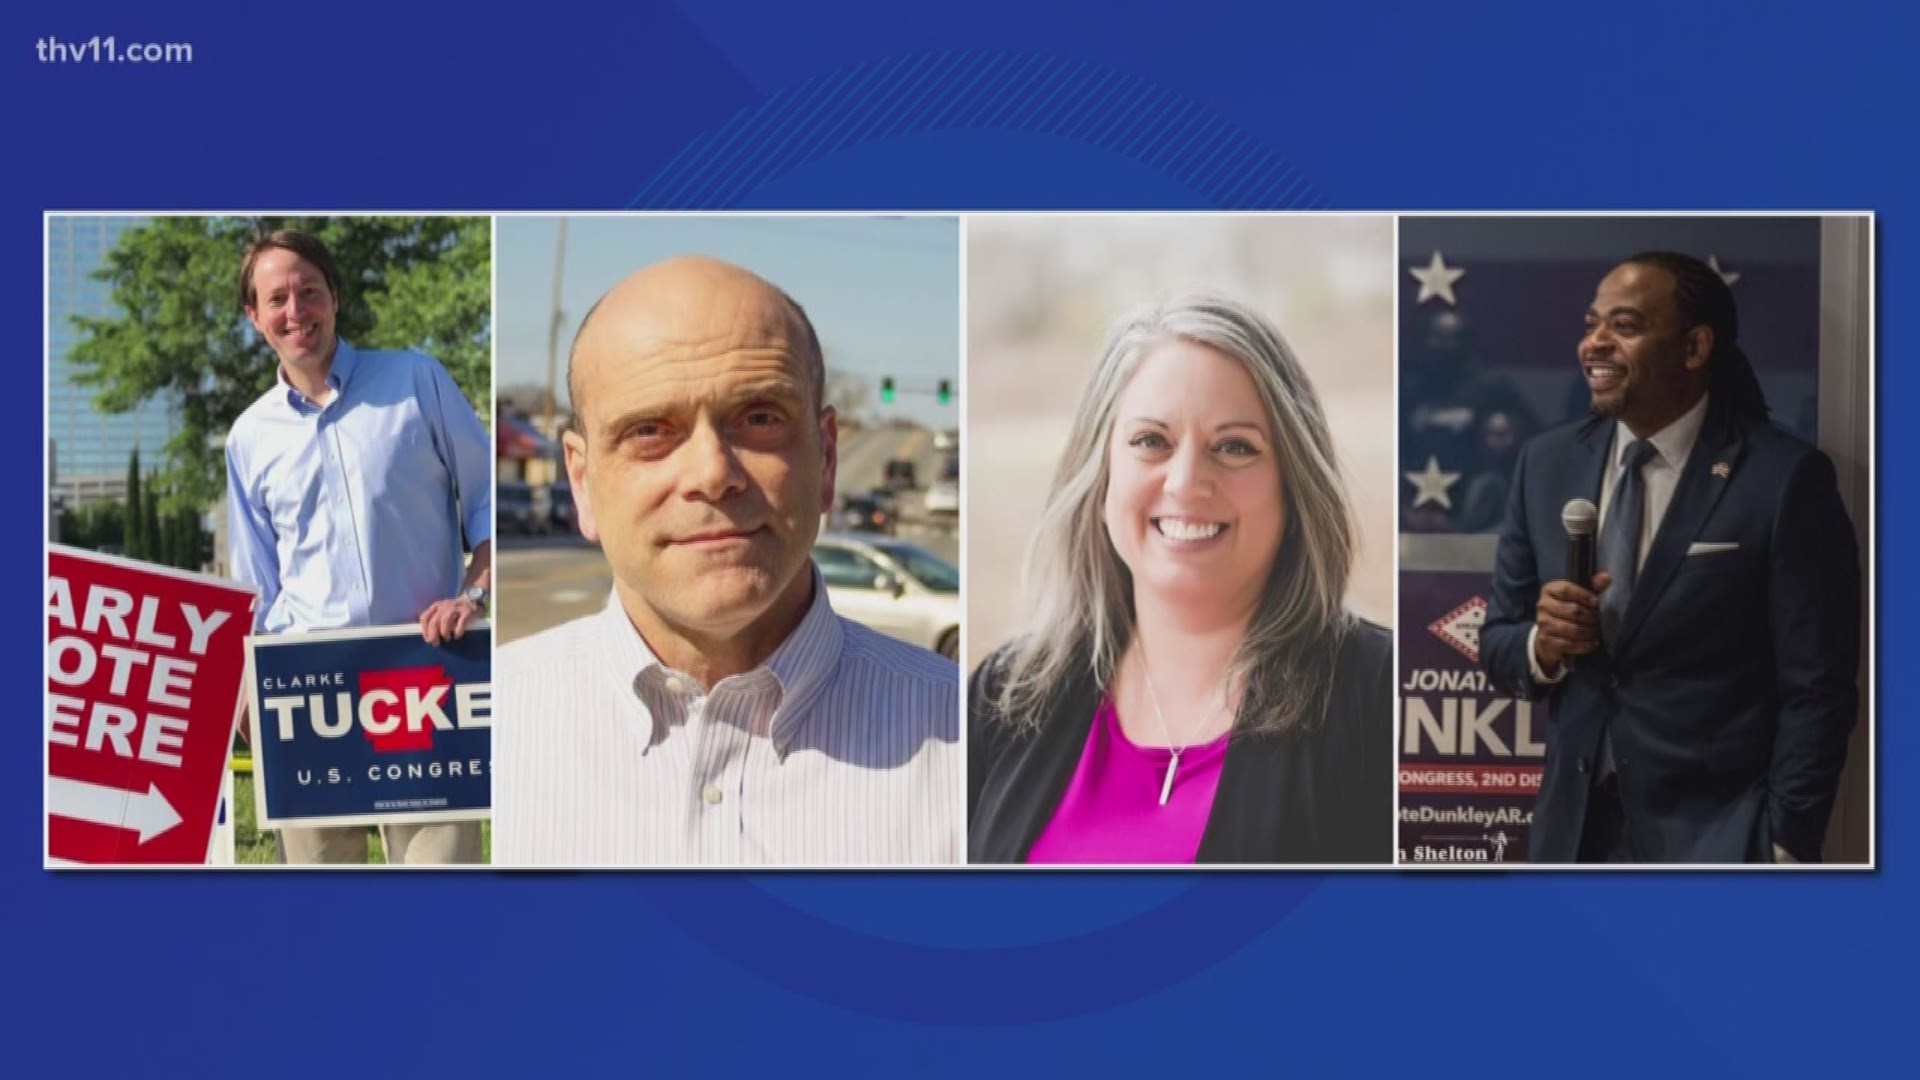 Four Democrats hope to face Rep. Hill in November